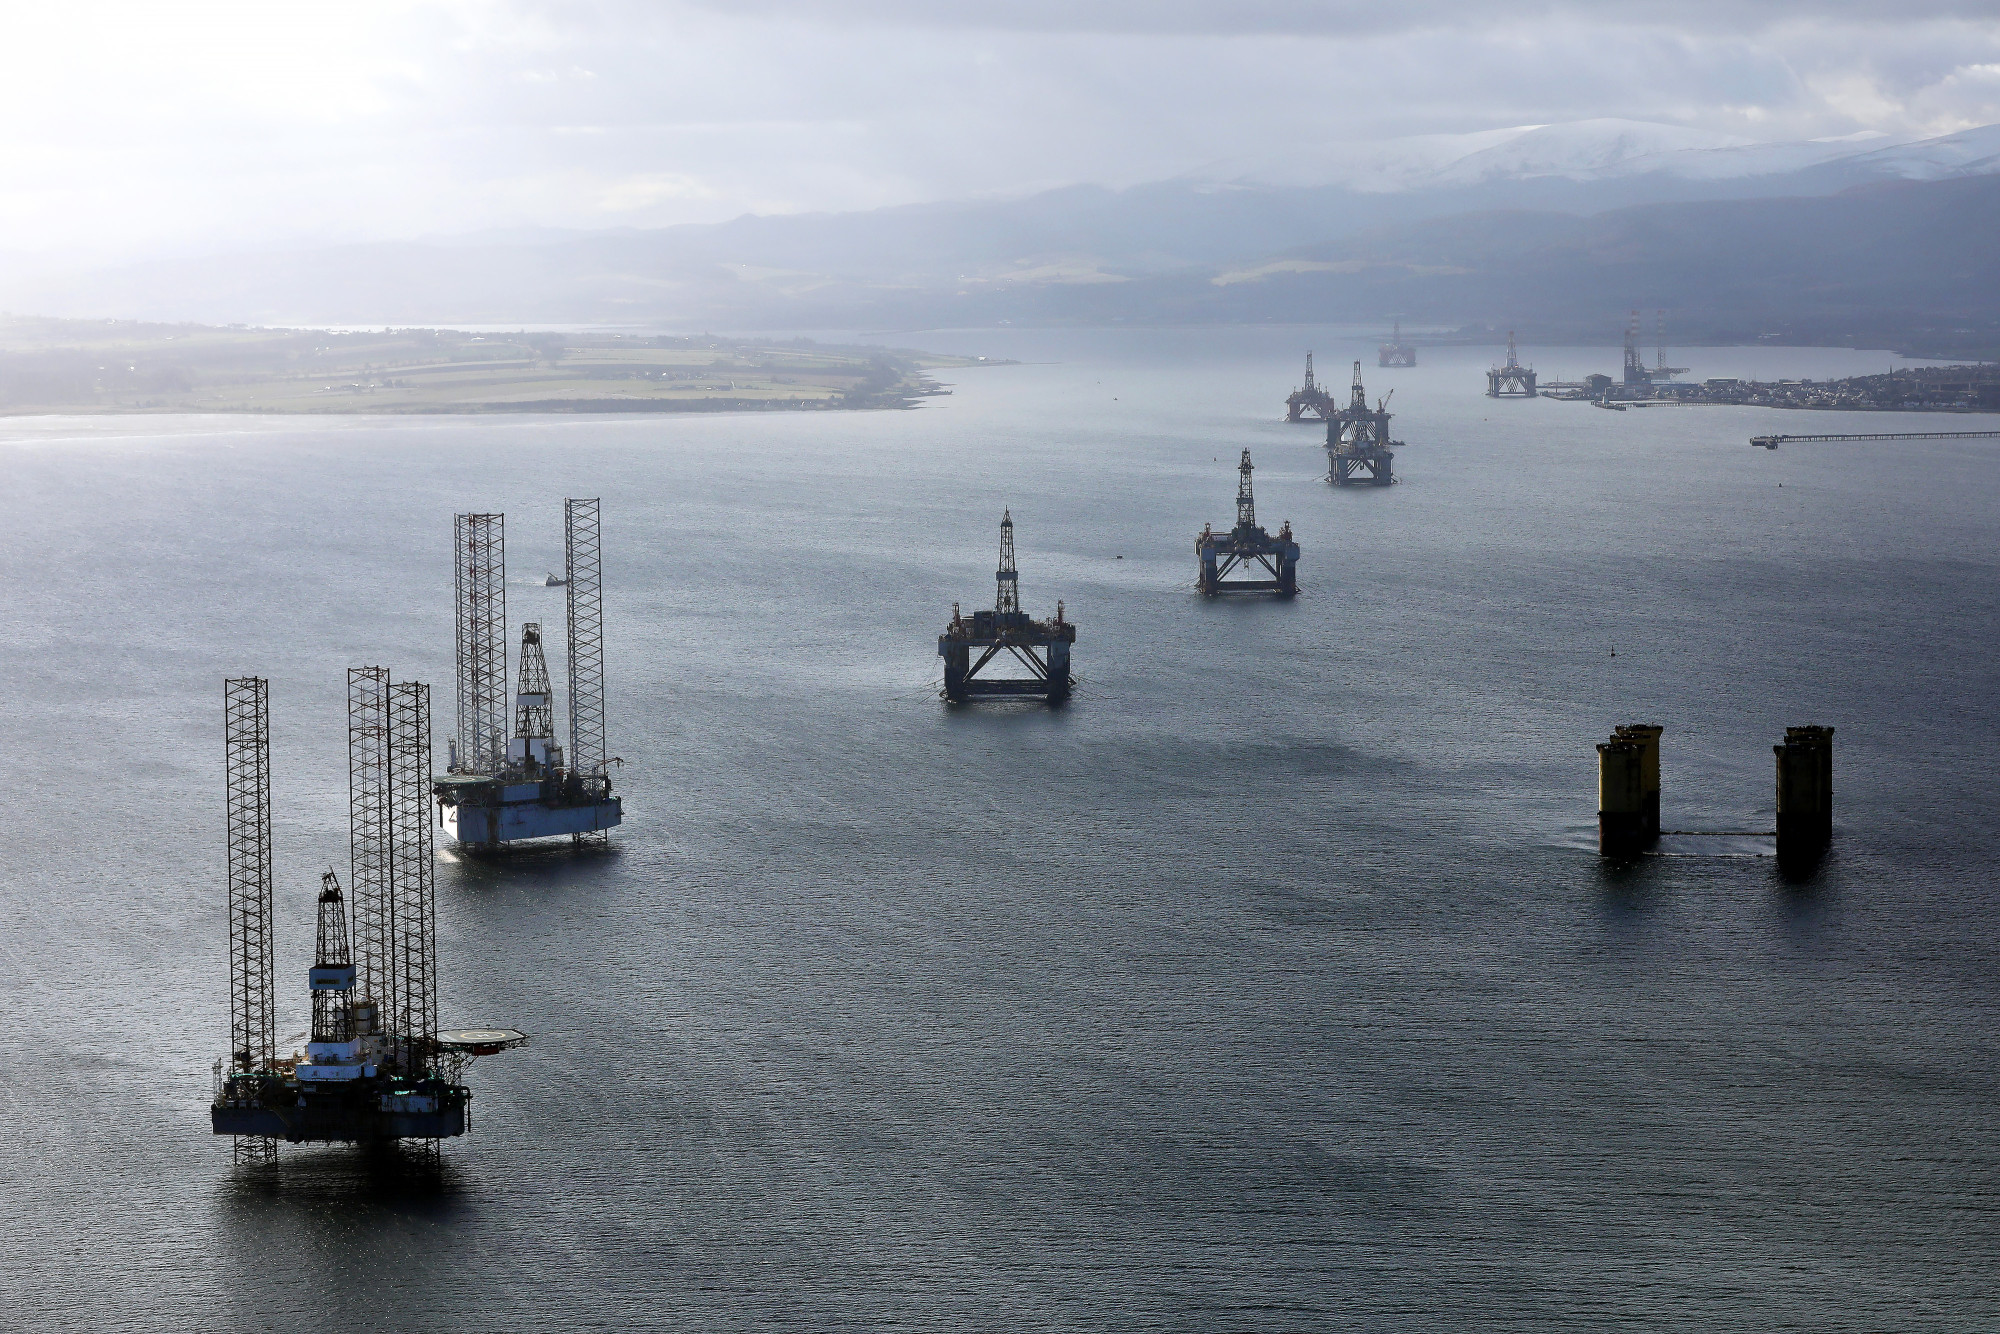 Mobile offshore drilling units in the Port of Cromarty Firth in Cromarty, U.K.